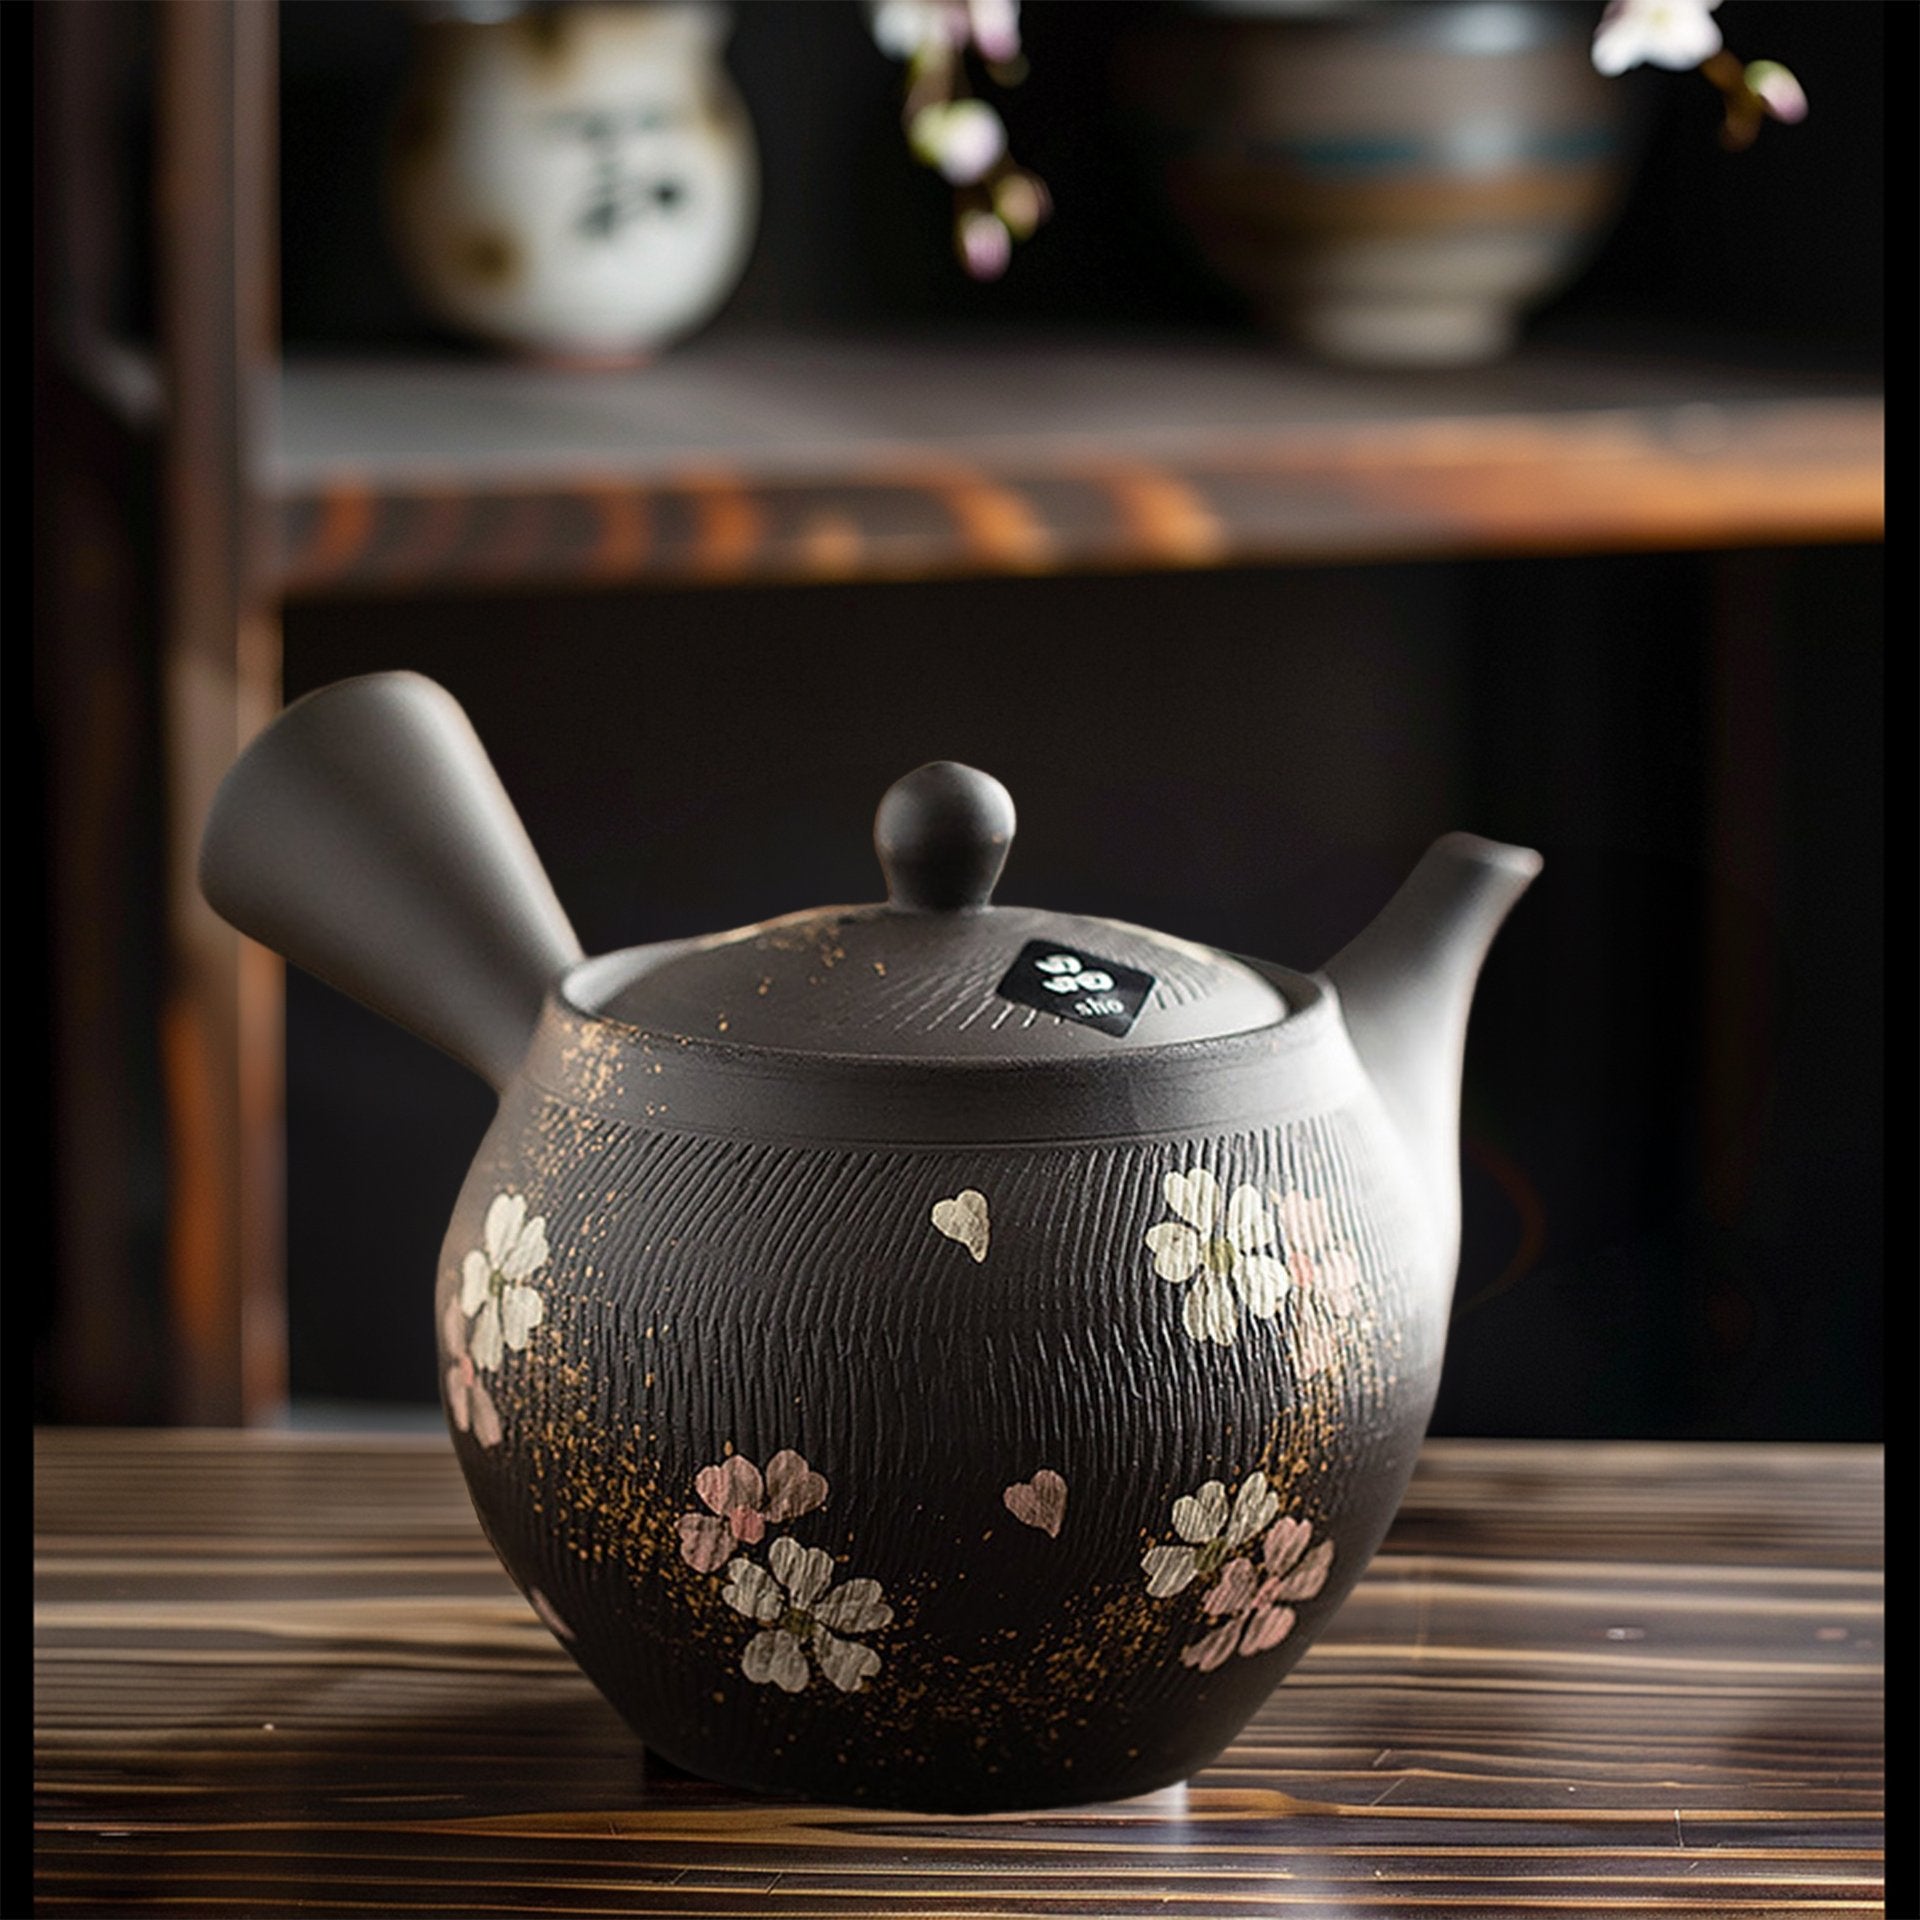 Aesthetic view of a dark teapot with floral decorations on a dark table.